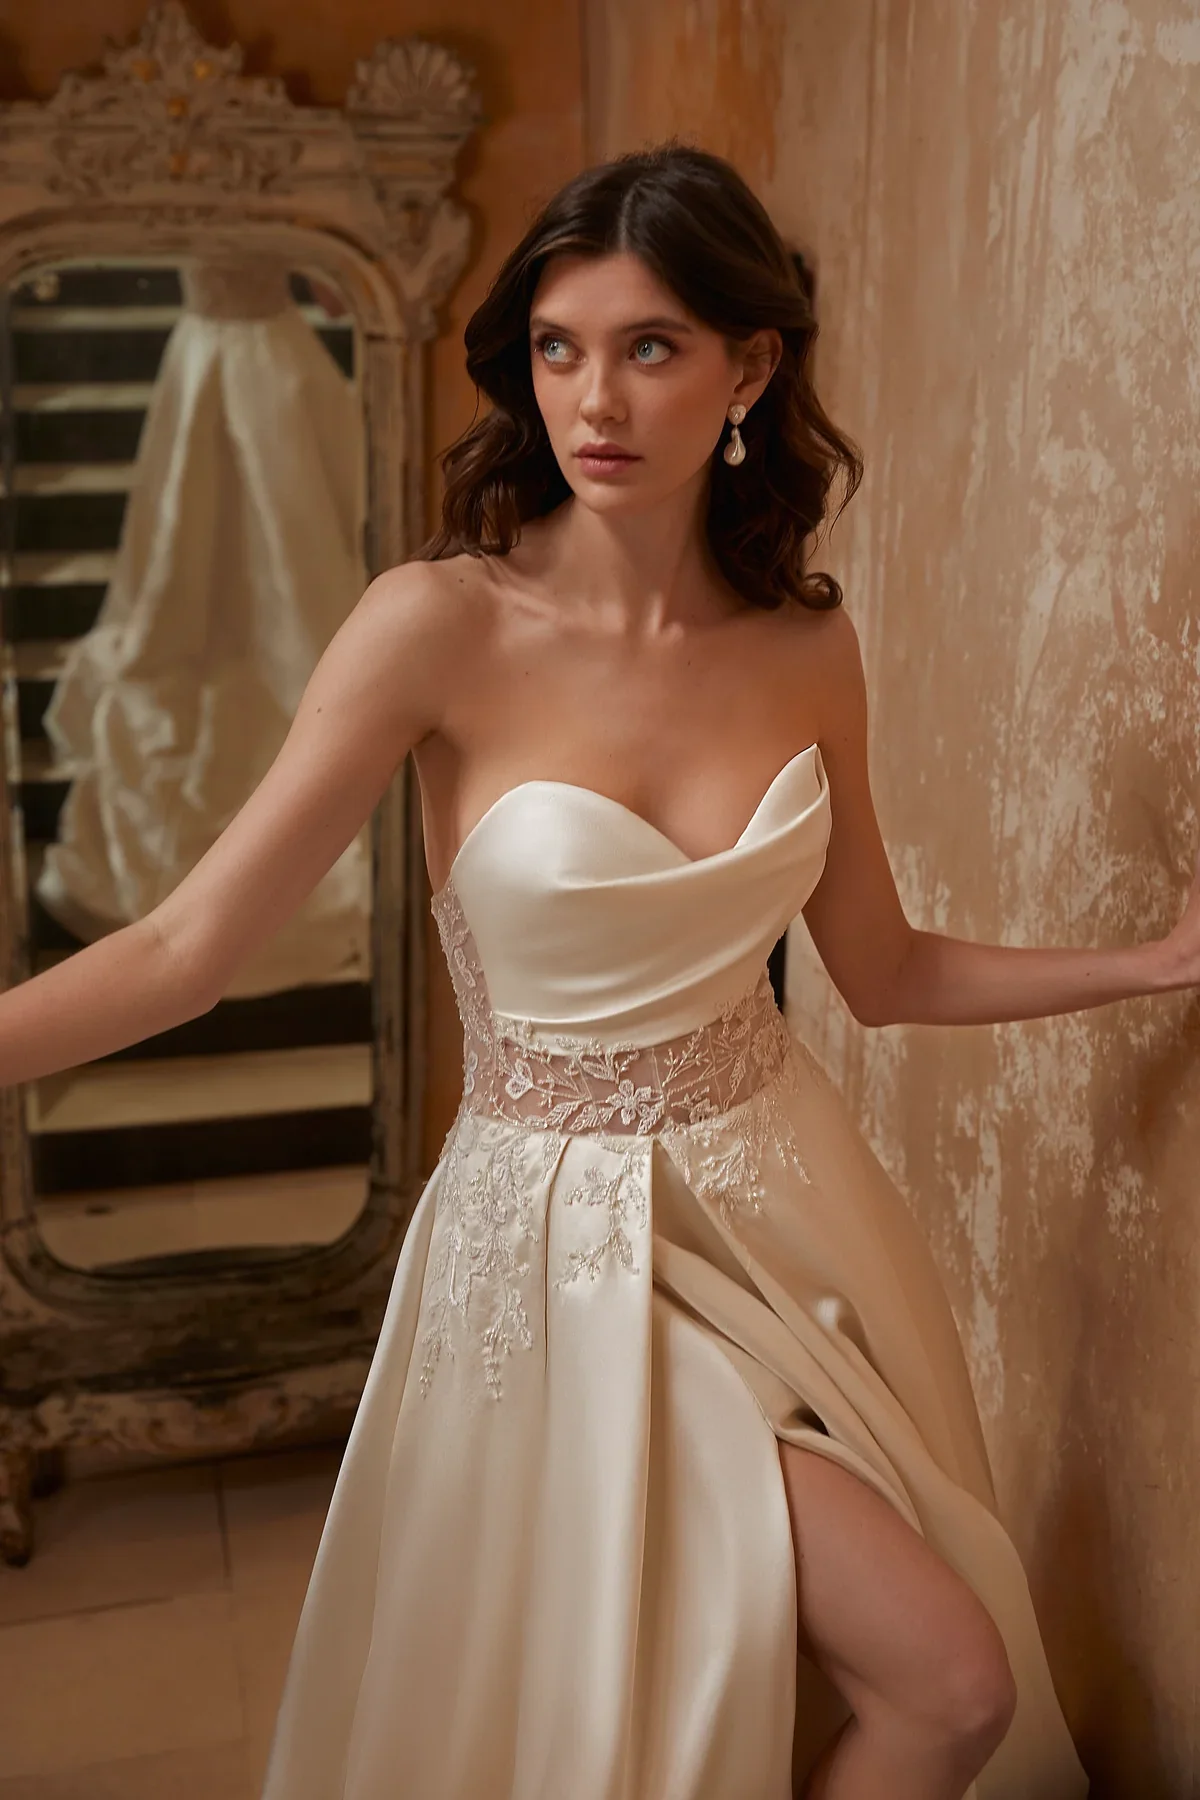 Asymmetrical Strapless Mikado Gown With Slit by Enaura Bridal - Image 1